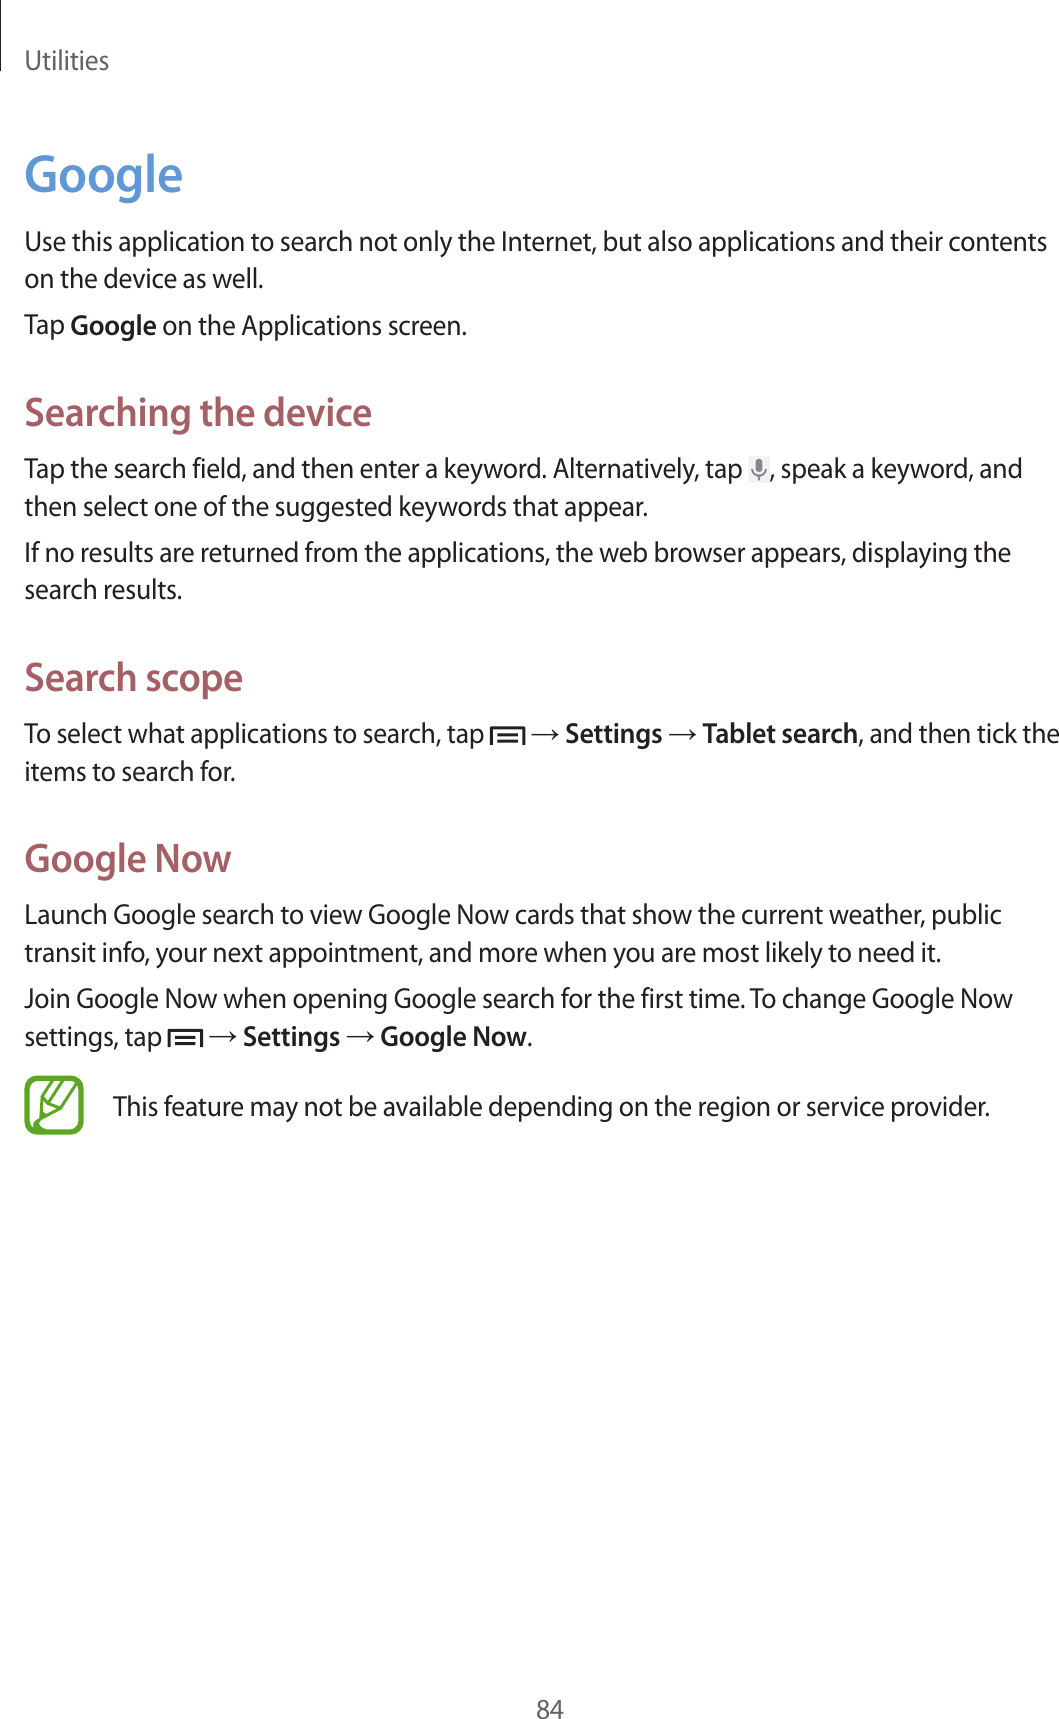 Utilities84GoogleUse this application to search not only the Internet, but also applications and their contents on the device as well.Tap Google on the Applications screen.Searching the deviceTap the search field, and then enter a keyword. Alternatively, tap  , speak a keyword, and then select one of the suggested keywords that appear.If no results are returned from the applications, the web browser appears, displaying the search results.Search scopeTo select what applications to search, tap   → Settings → Tablet search, and then tick the items to search for.Google NowLaunch Google search to view Google Now cards that show the current weather, public transit info, your next appointment, and more when you are most likely to need it.Join Google Now when opening Google search for the first time. To change Google Now settings, tap   → Settings → Google Now.This feature may not be available depending on the region or service provider.